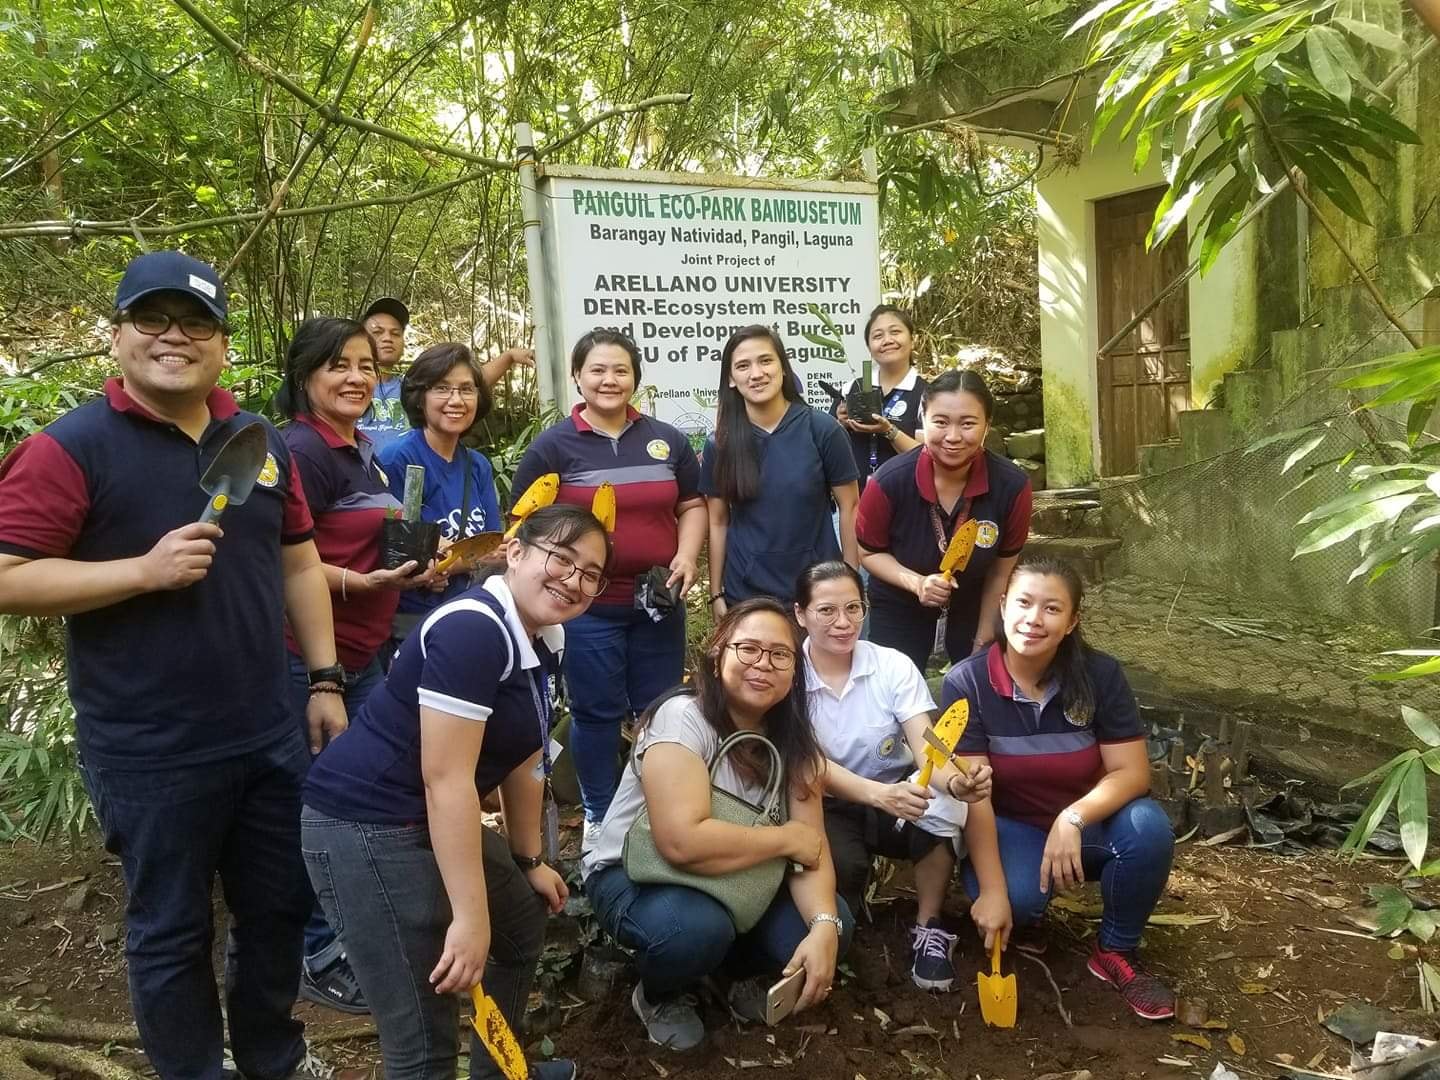 Bambusetum in Panguil River Ecopark. Students, faculty members and non-teaching personnel actively participate in bamboo propagation.